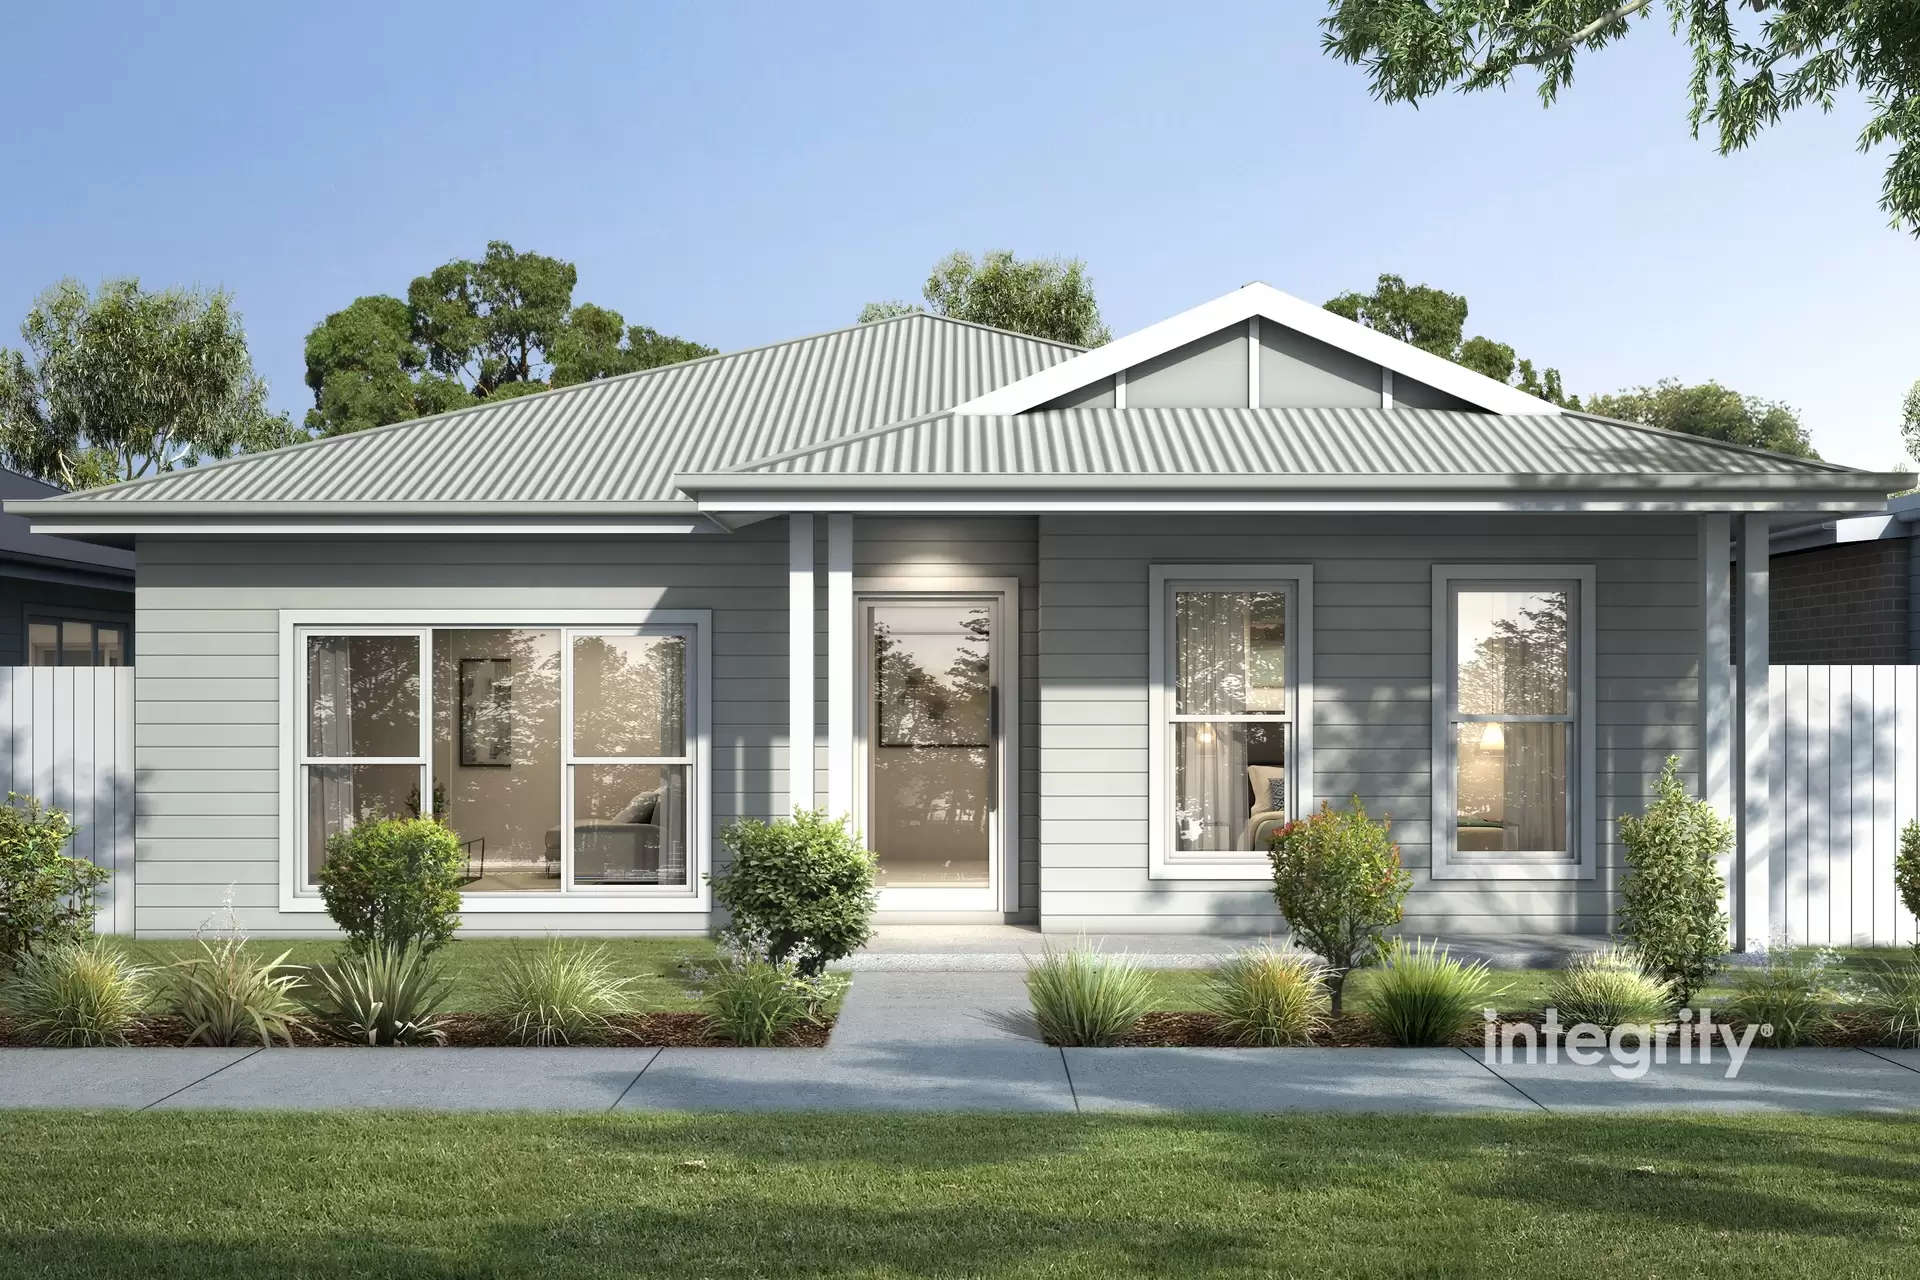 Lot 137,  Wirraway Boulevard, Badagarang For Sale by Integrity Real Estate - image 2